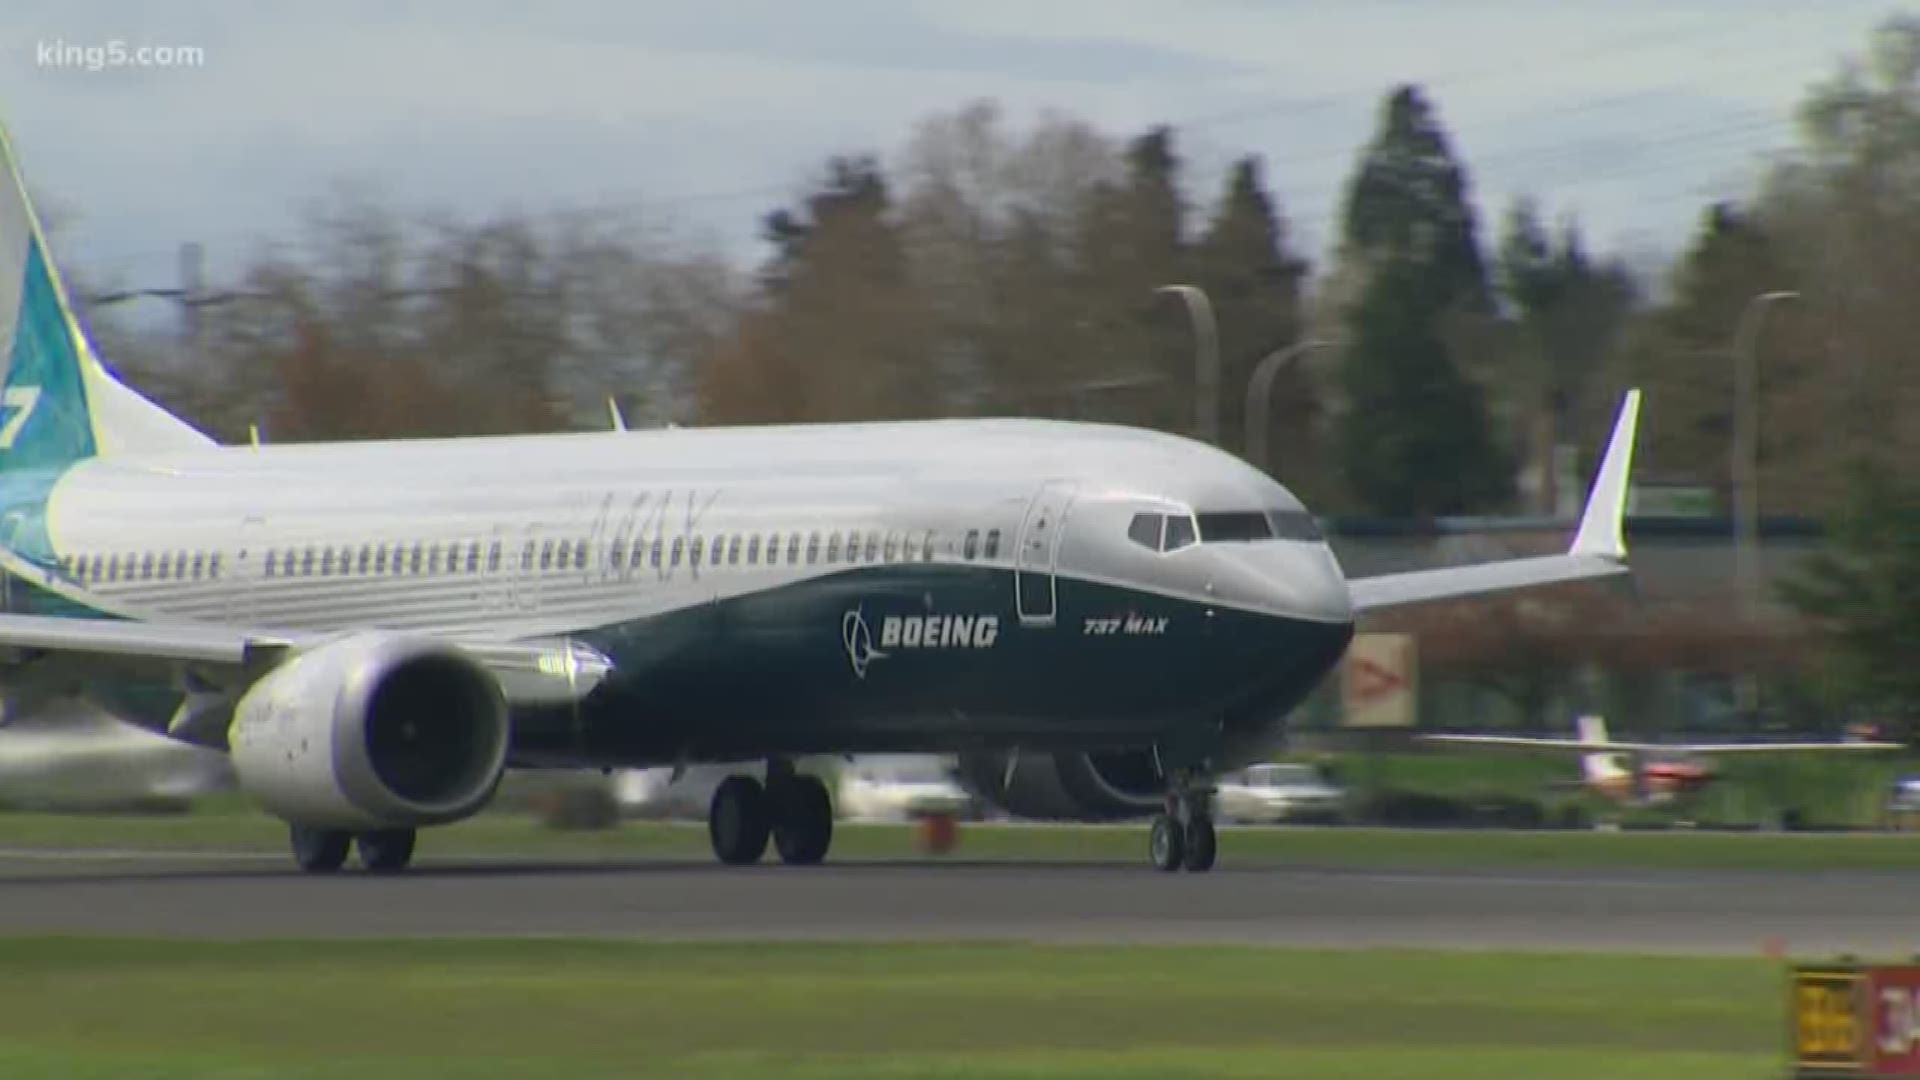 Boeing's 737 Max 8 and 9 aircraft has been grounded less than 24 hours after the Federal Aviation Administration said it had no reason to believe there was a systemic problem that would warrant a grounding. So changed? KING 5's Glenn Farley has the details.